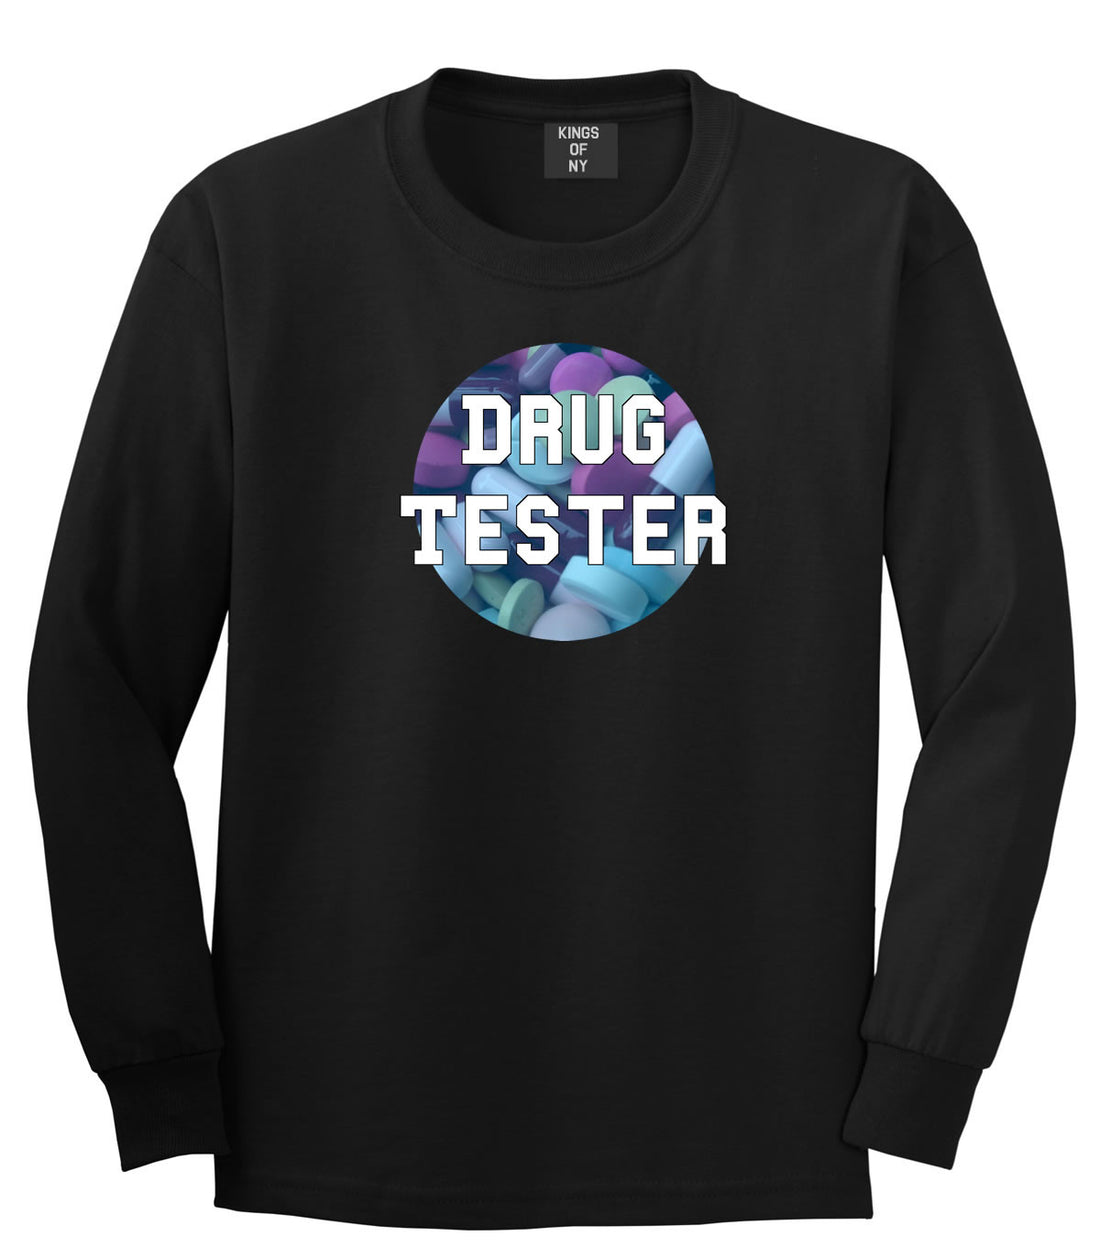 Drug tester weed smoking funny college Long Sleeve Boys Kids T-Shirt In Black by Kings Of NY